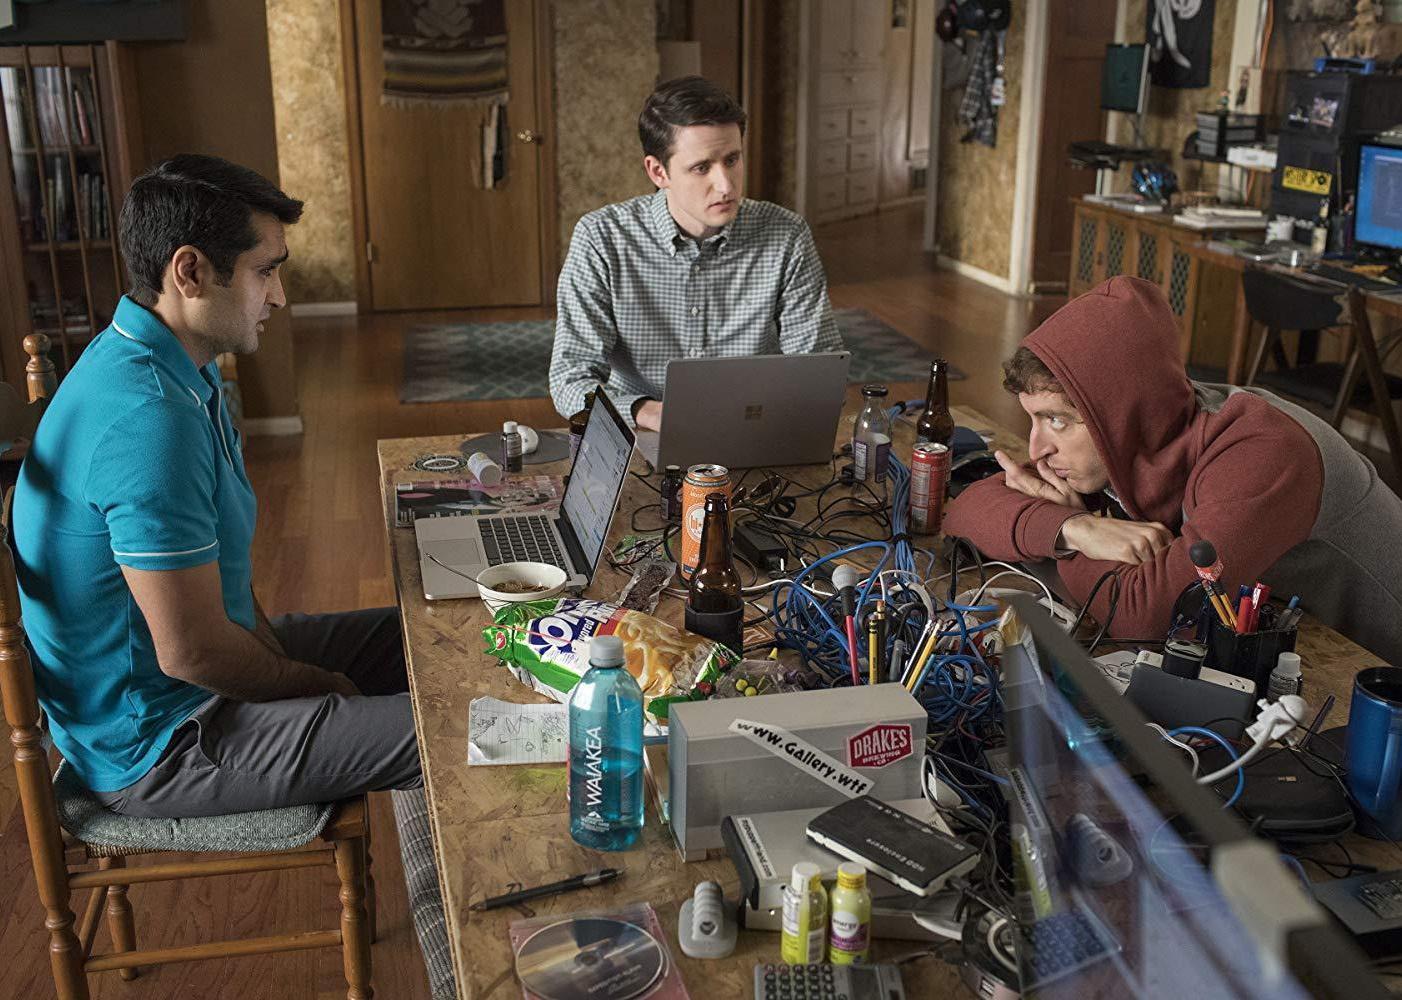 Actors in a scene from ‘Silicon Valley’.